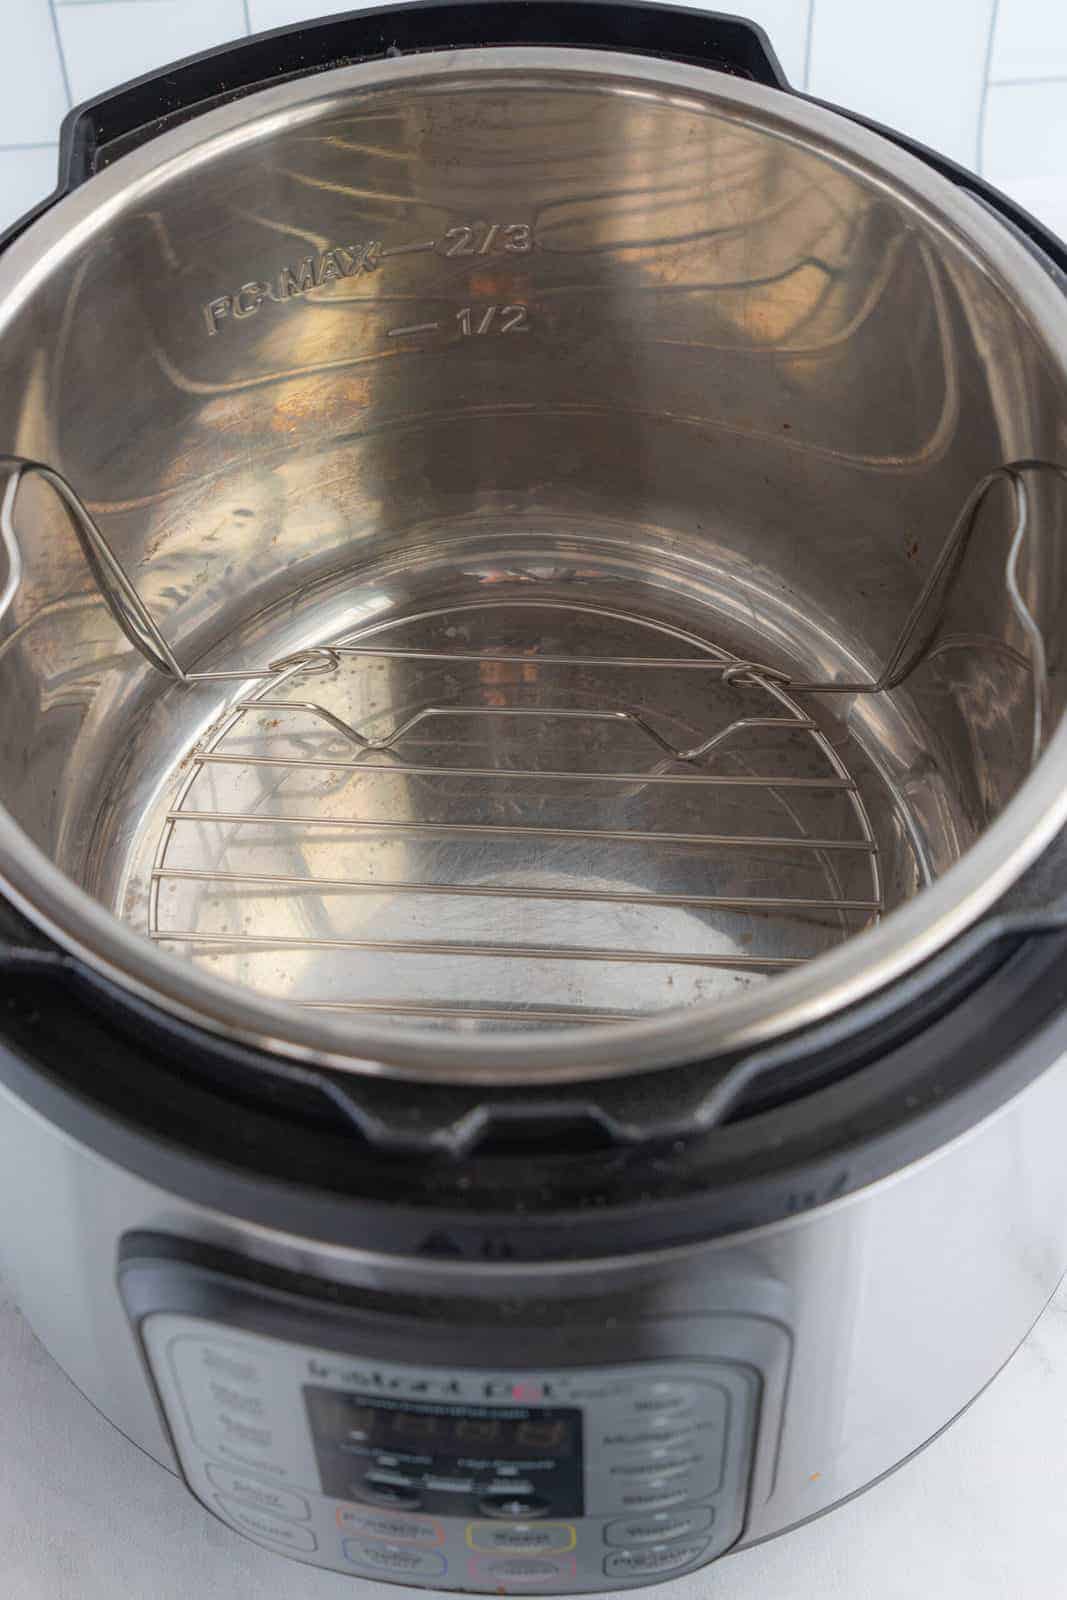 An instant pot with the lid off showing the clean inside.